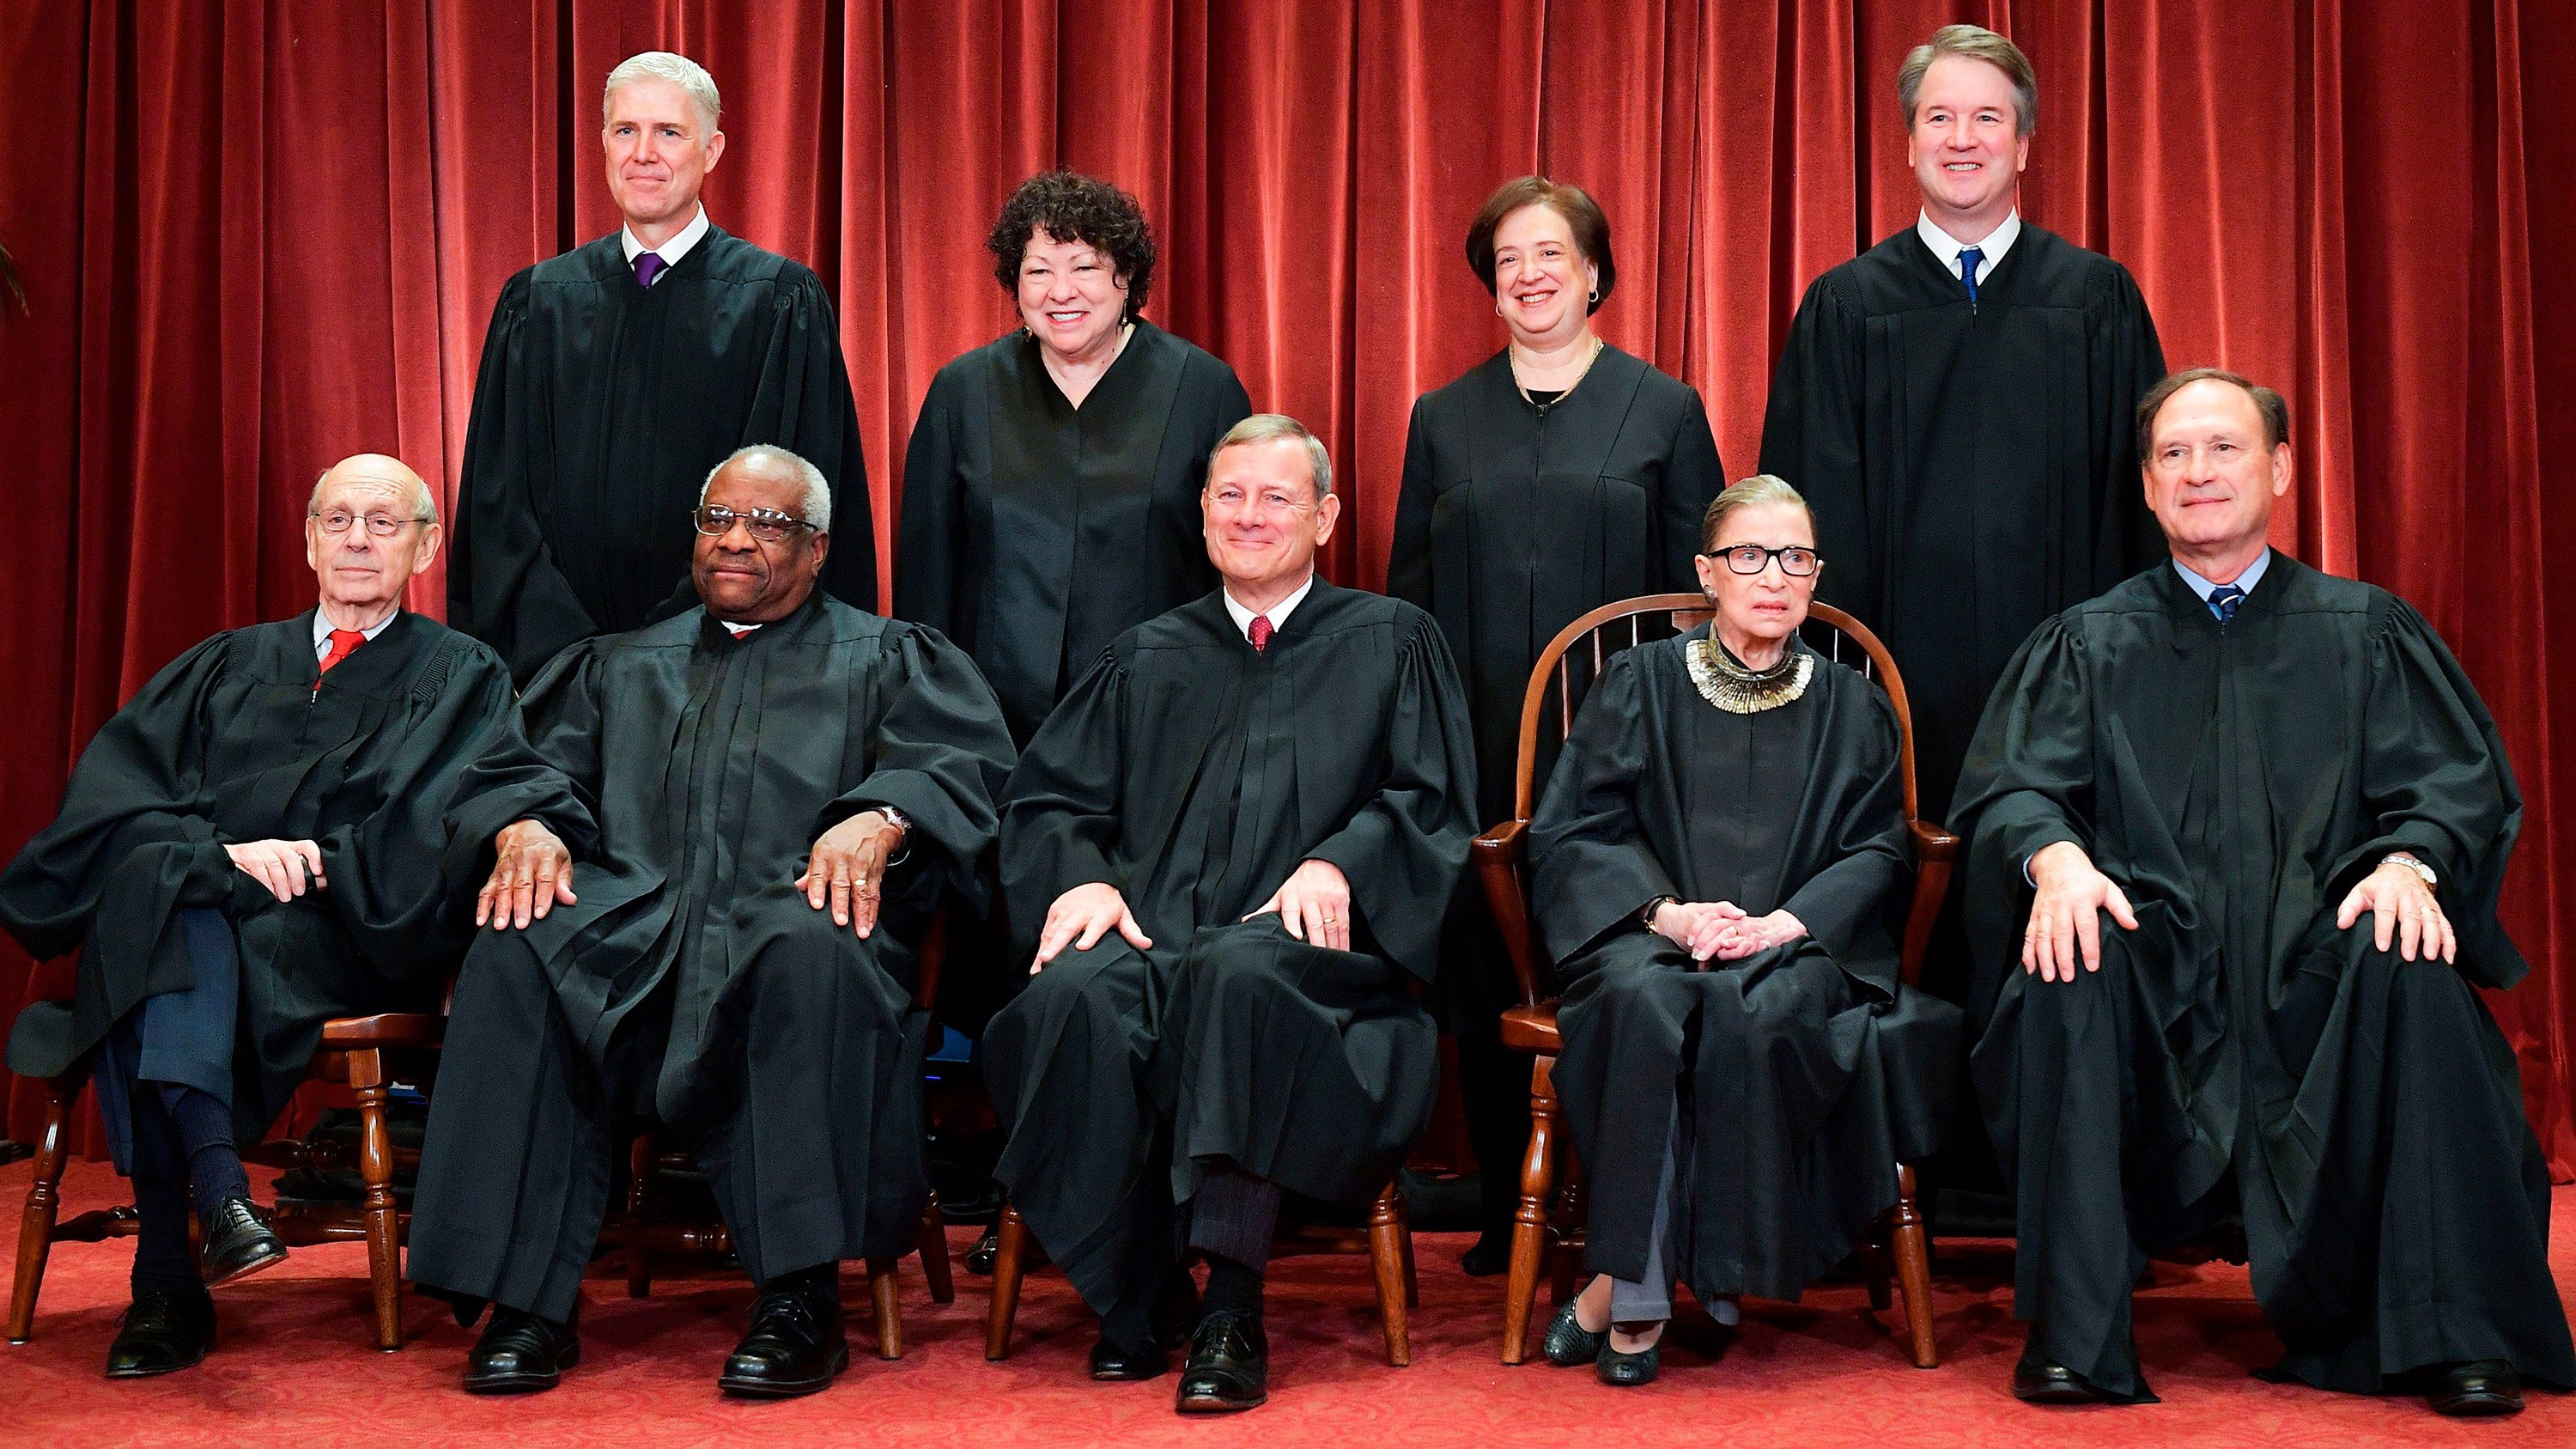 Conservative Supreme Court majority says it will hear 2nd Amendment